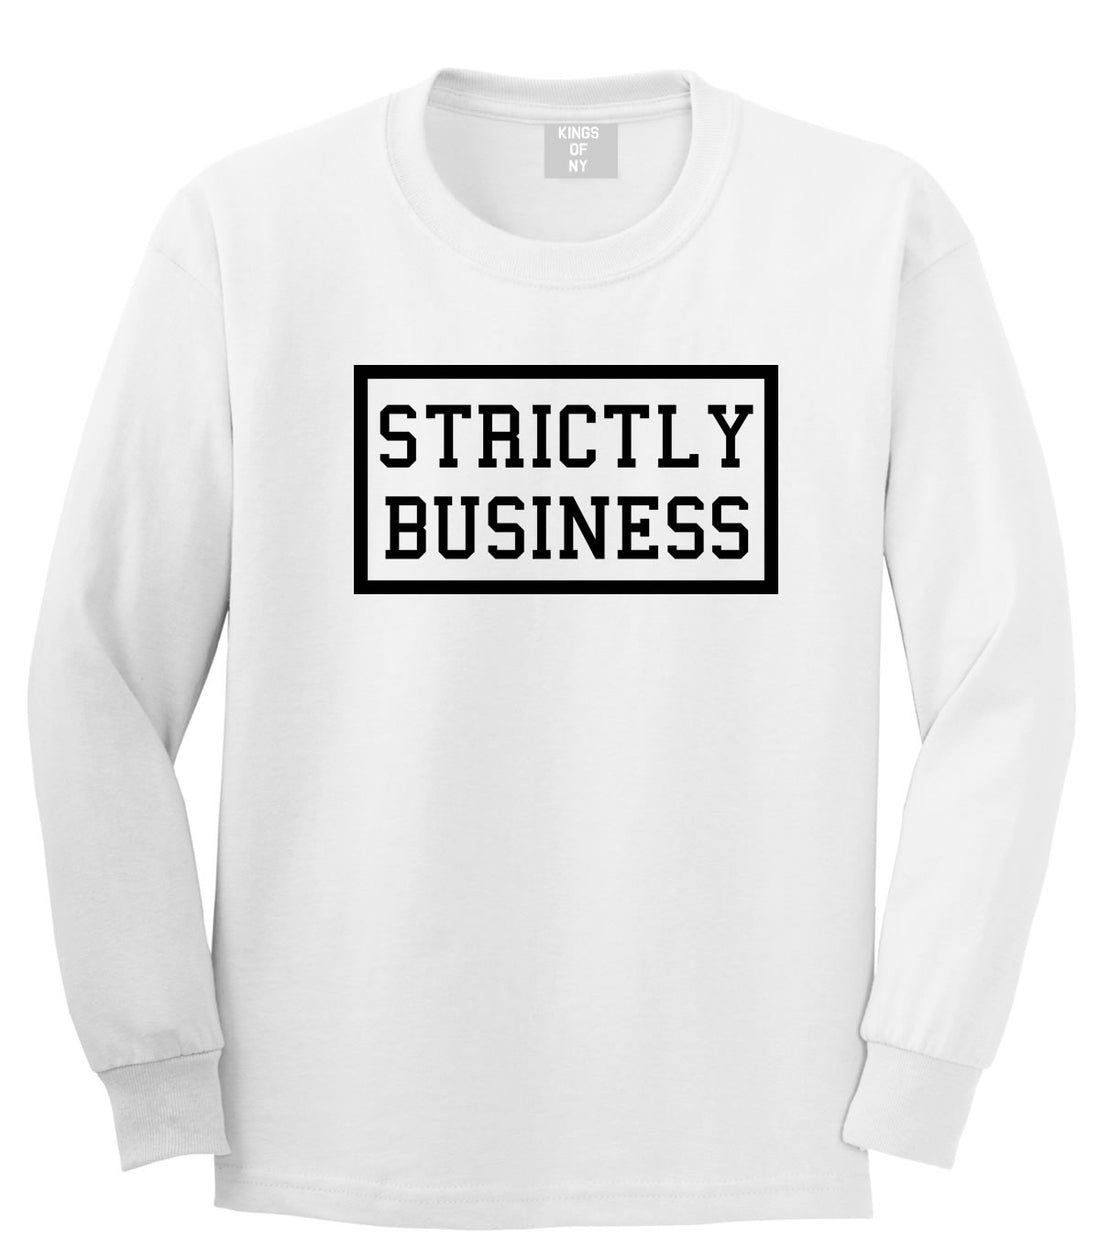 Strictly Business Long Sleeve T-Shirt in White by Kings Of NY